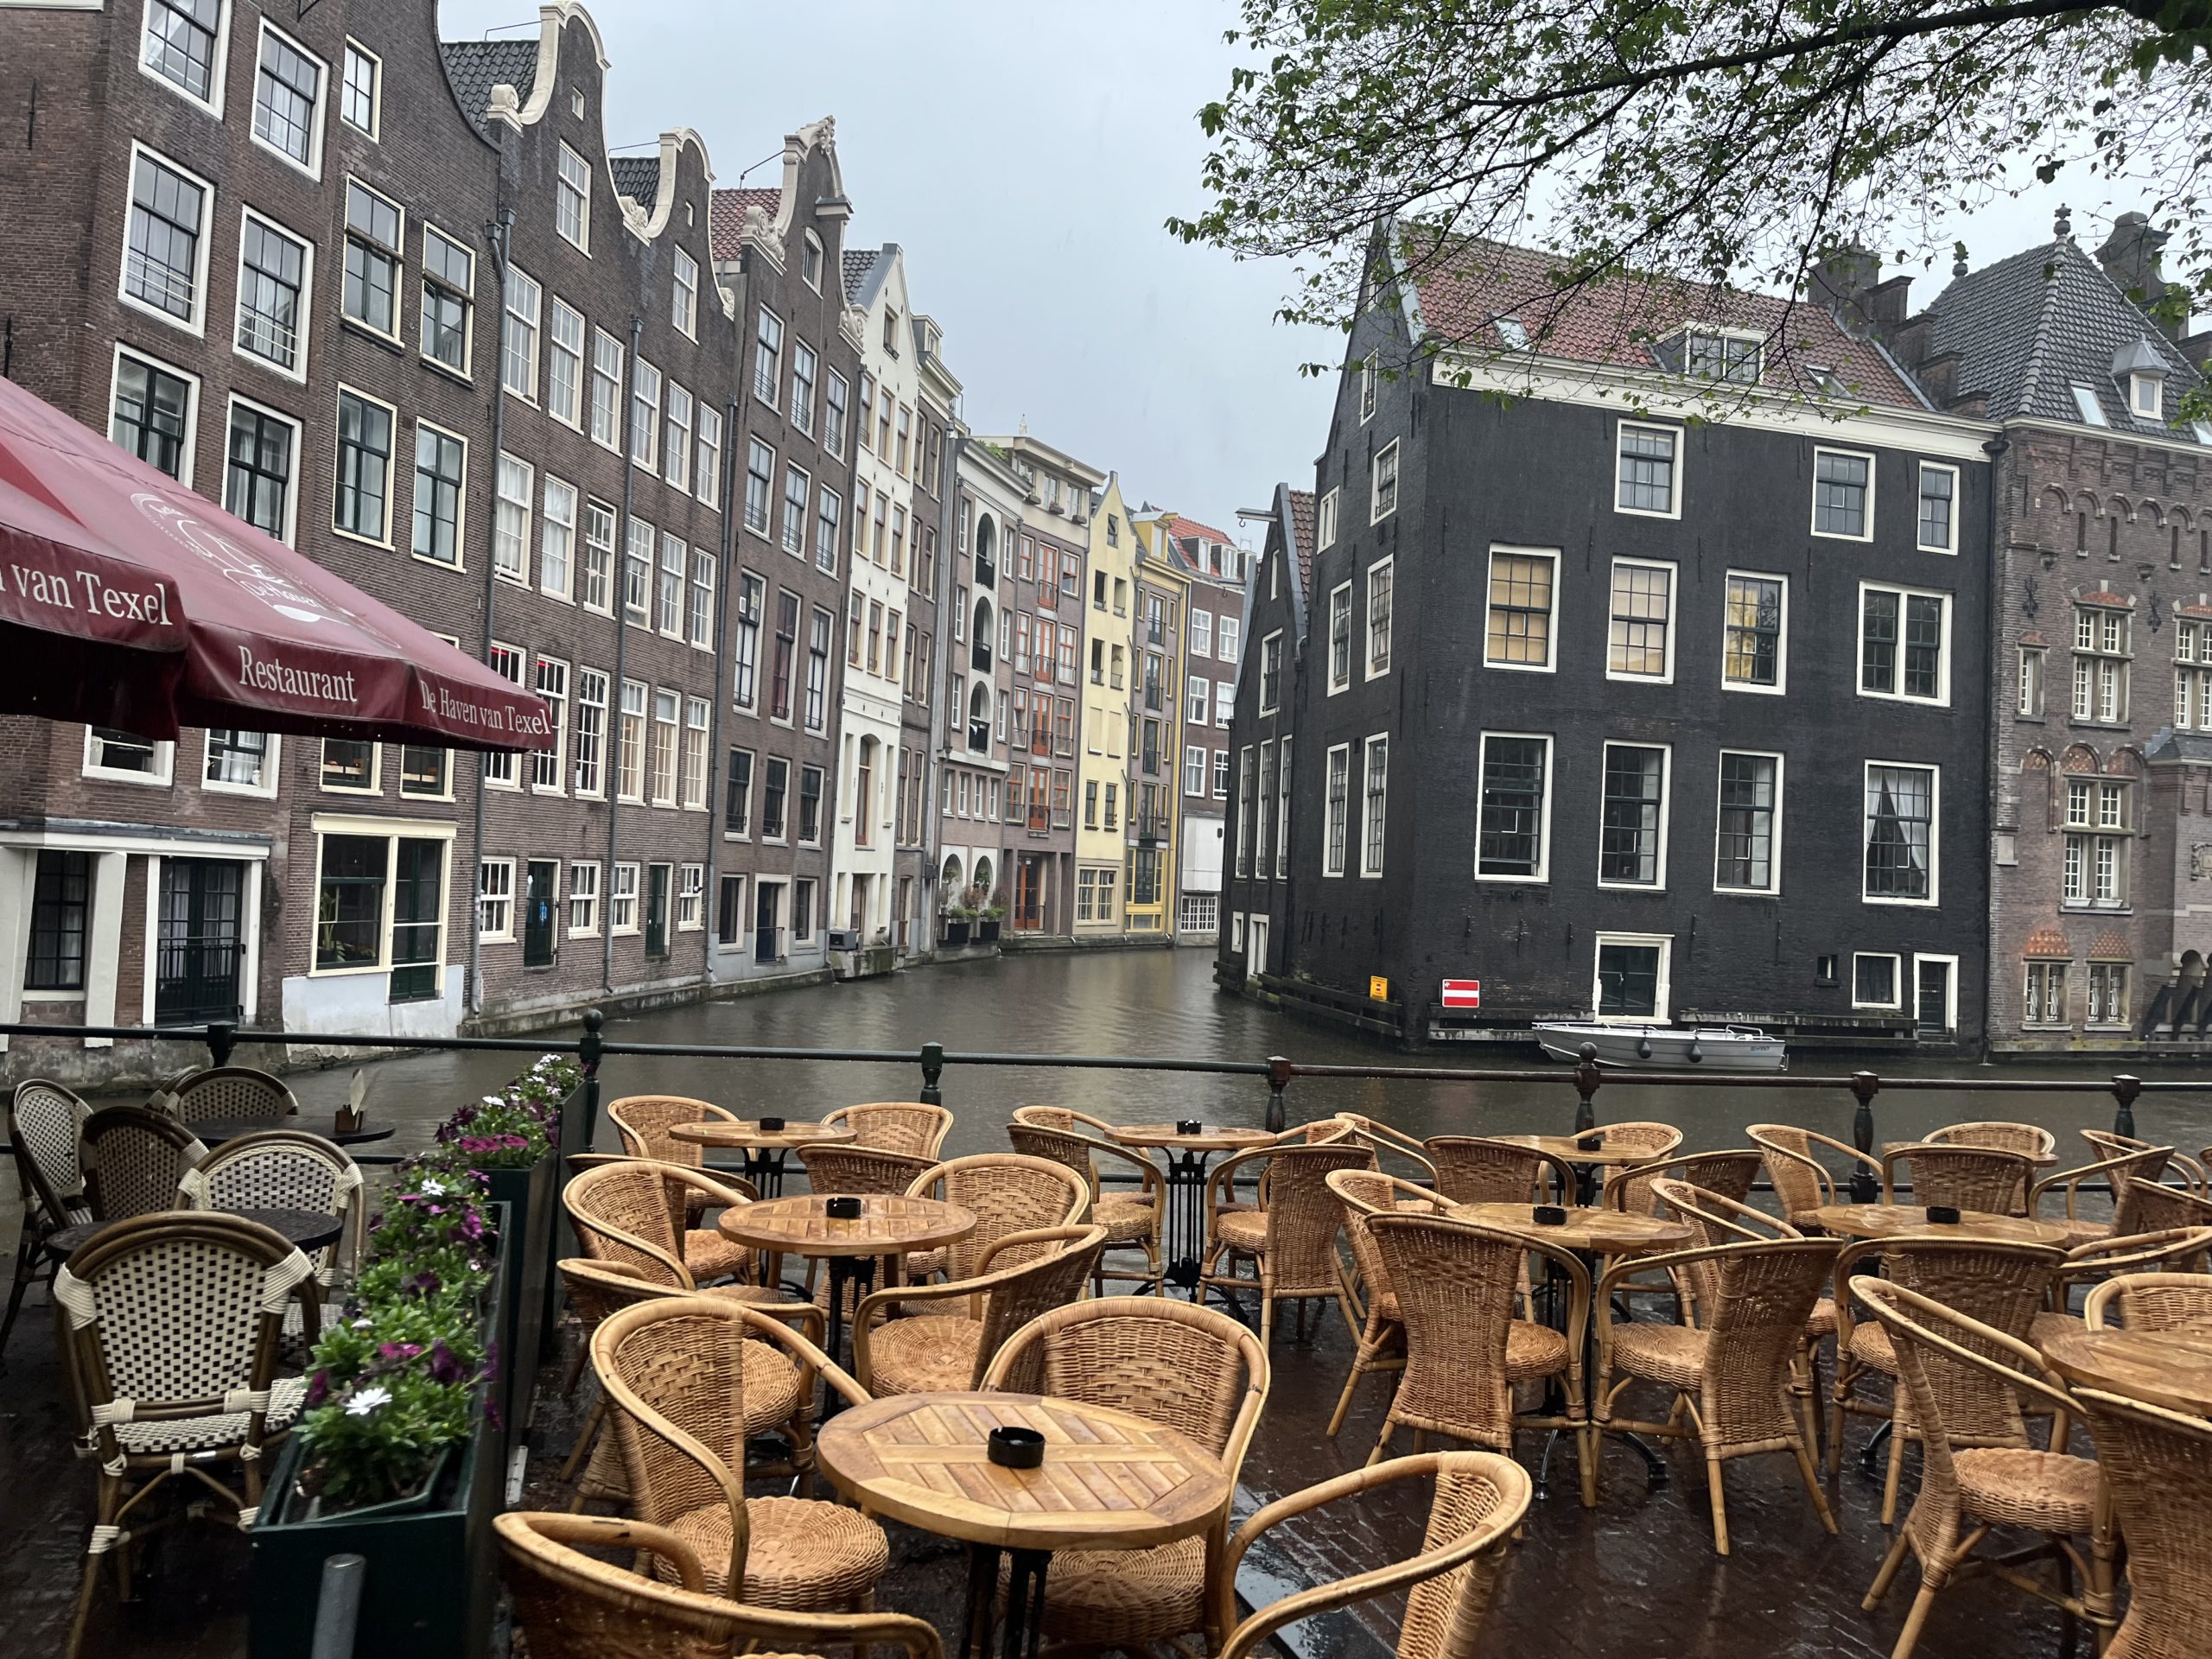 Amsterdam canal with wicker chairs